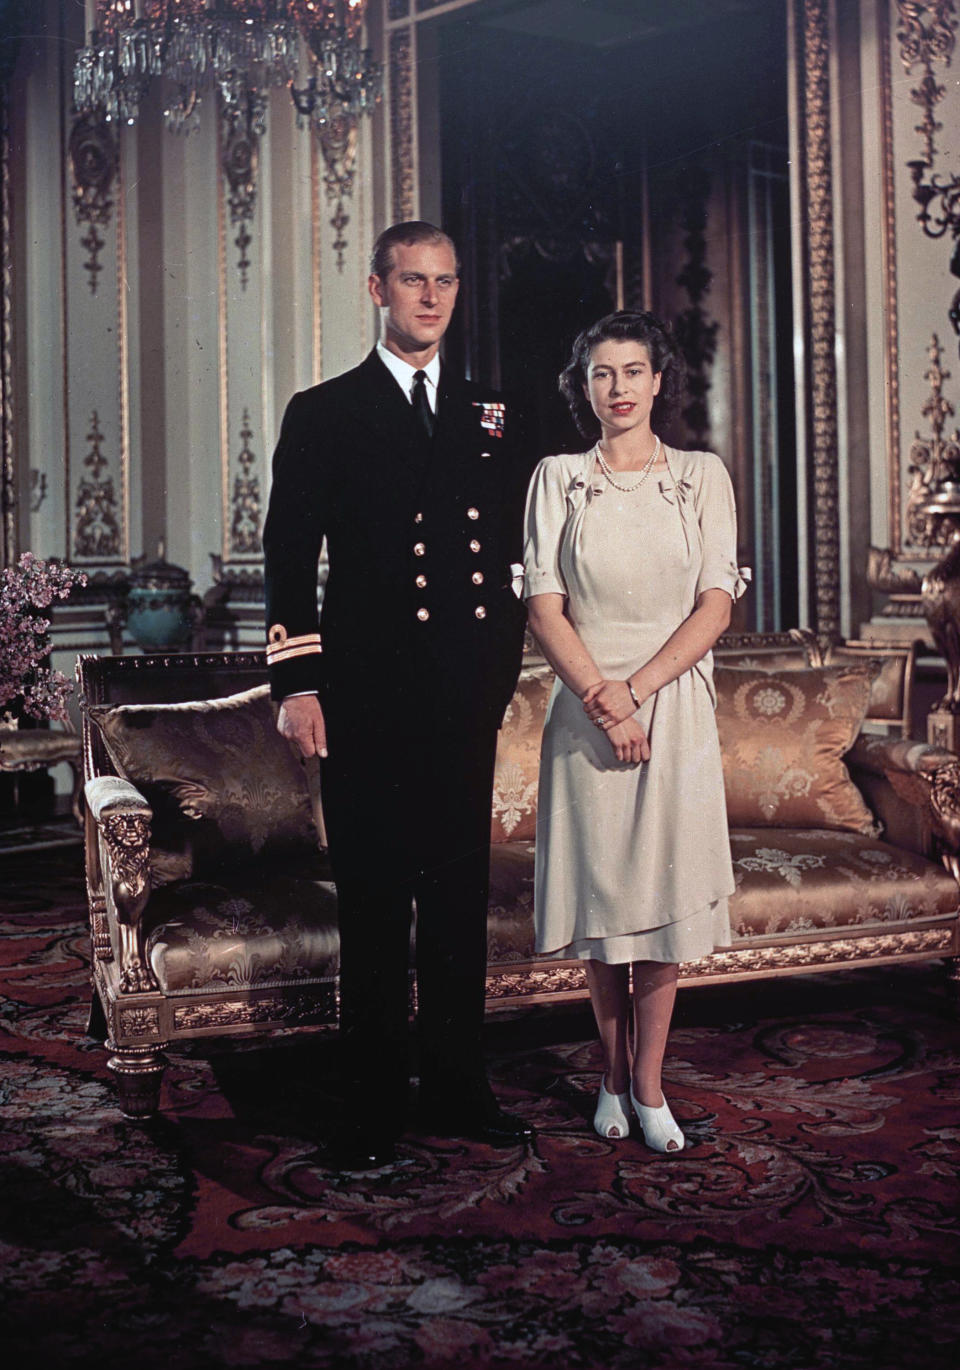 FILE - Britain's Princess Elizabeth and Lt. Philip Mountbatten pose for a photo, in London, Sept. 1947. Queen Elizabeth II will mark 70 years on the throne Sunday, Feb. 6, 2022, an unprecedented reign that has made her a symbol of stability as the United Kingdom navigated an age of uncertainty. (AP Photo, File)